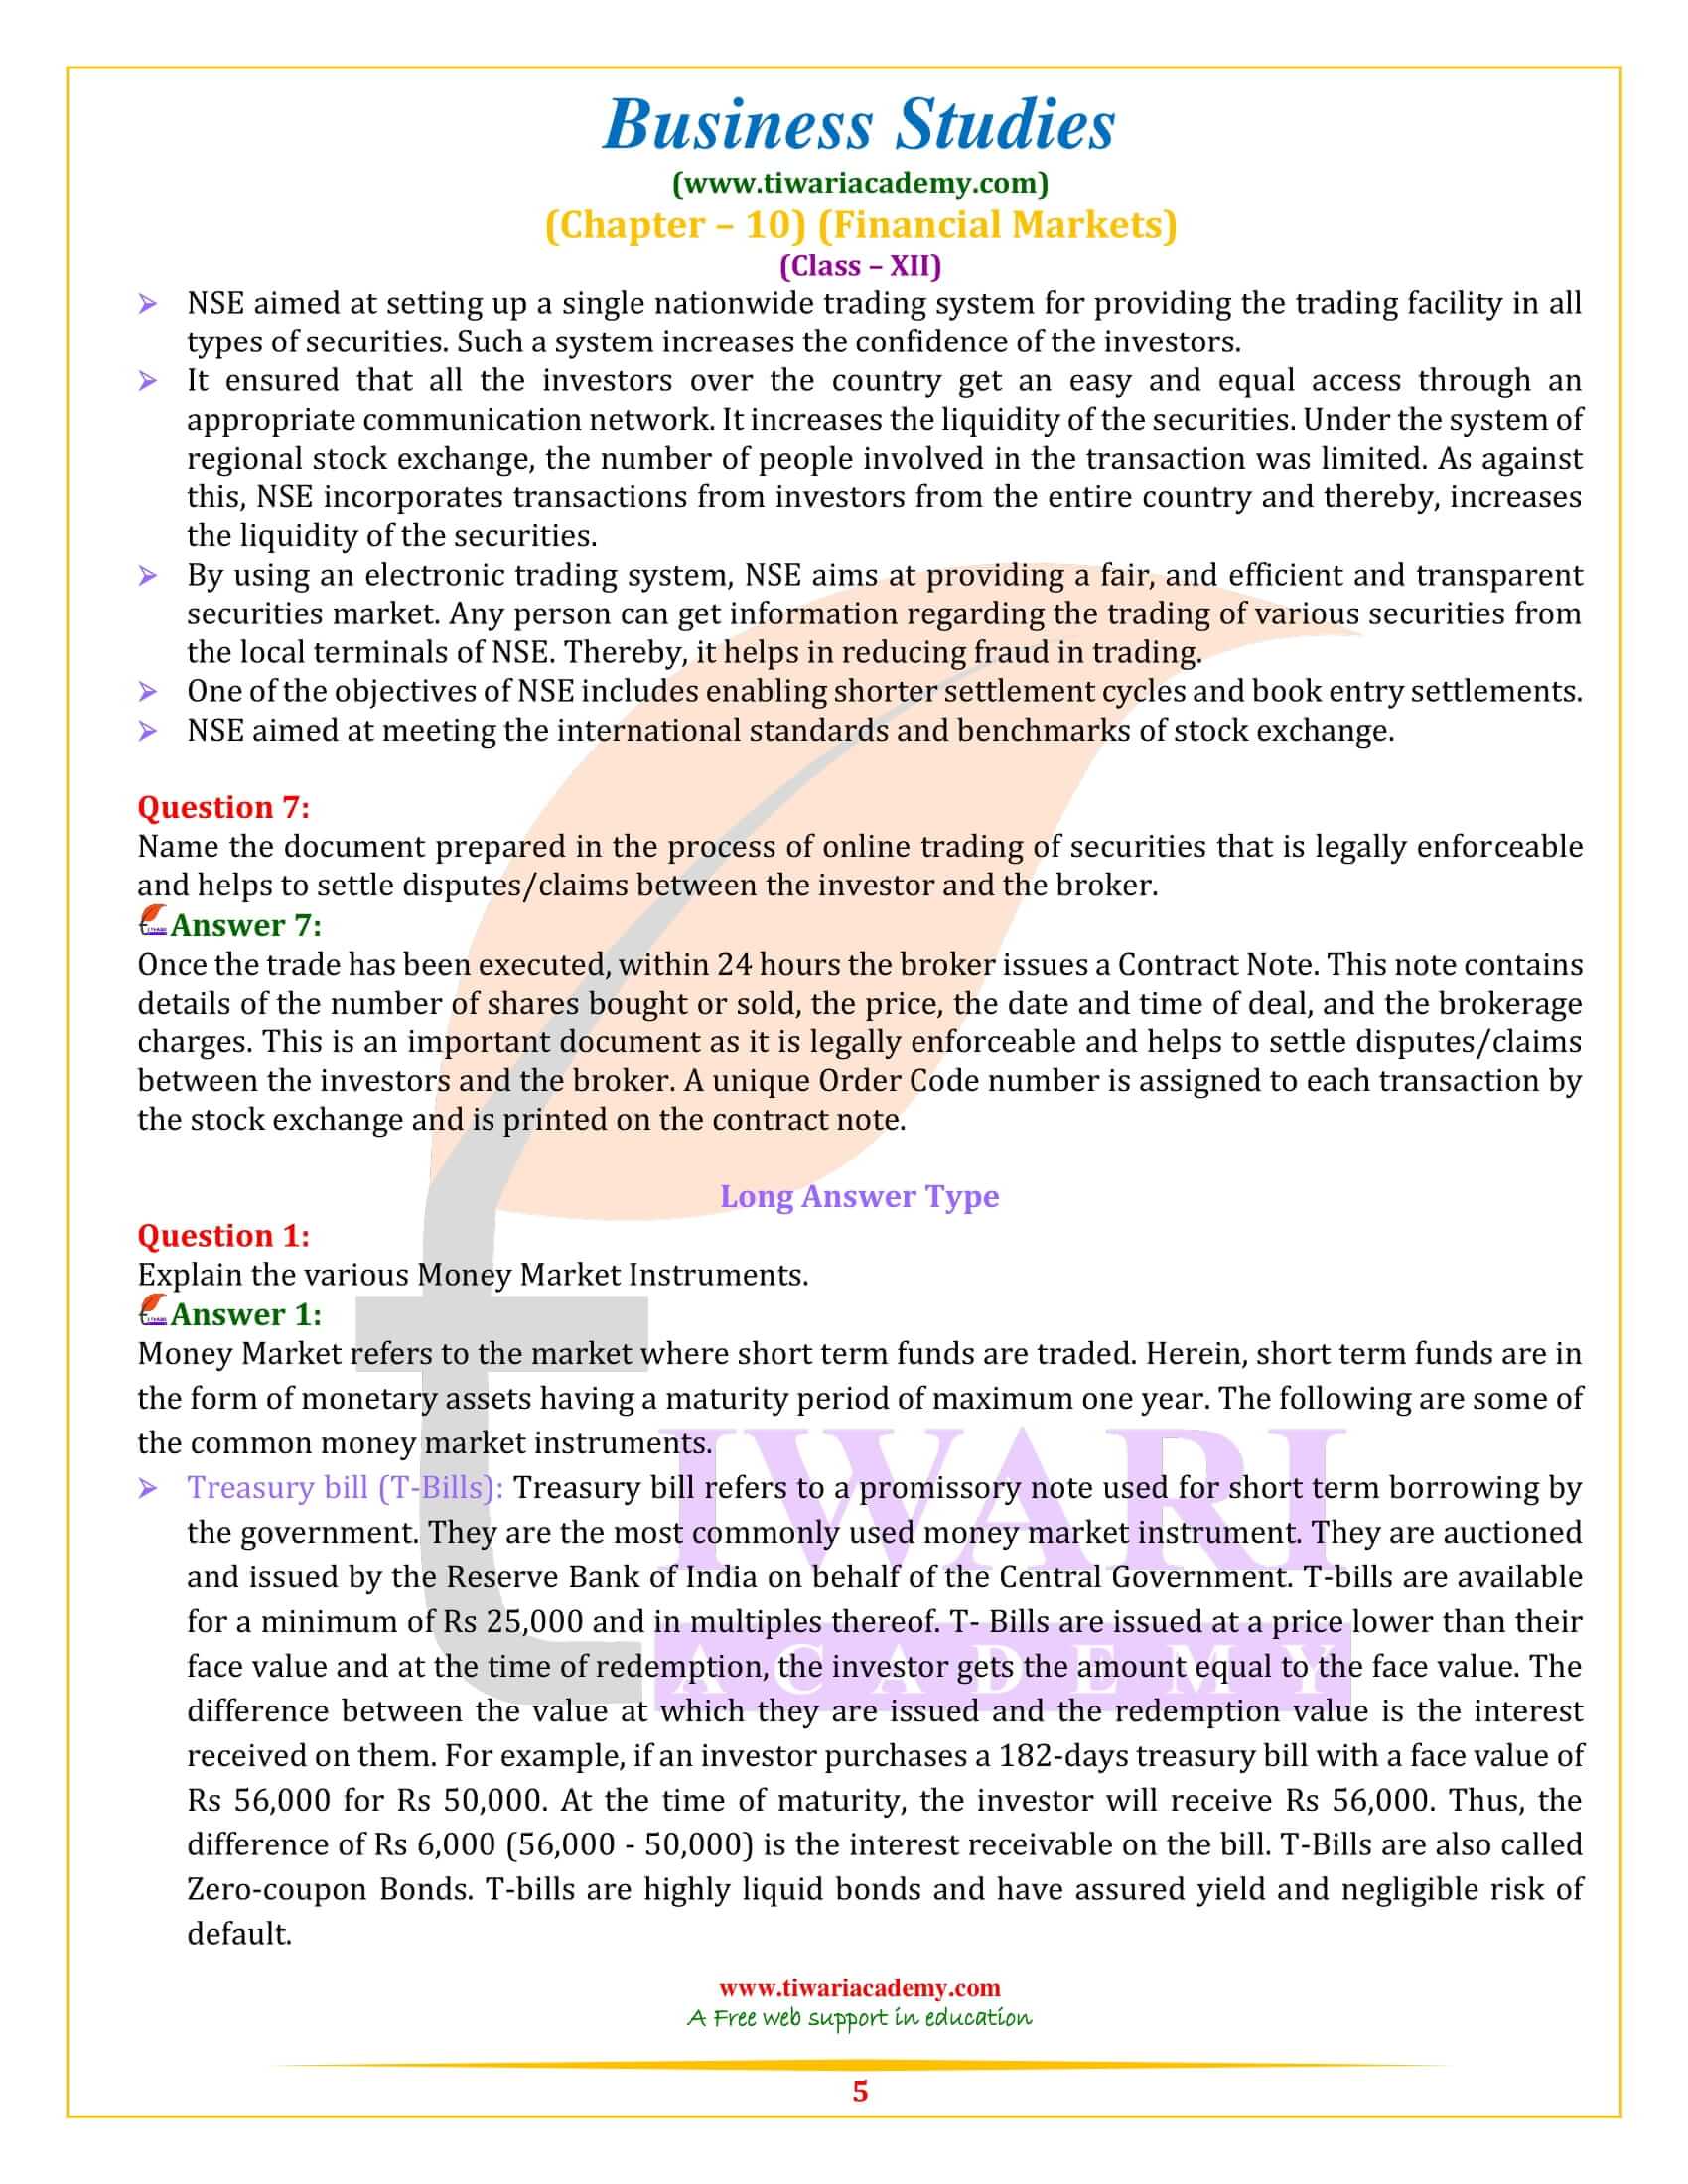 NCERT Solutions for Class 12 Business Studies Chapter 10 very short answers type questions